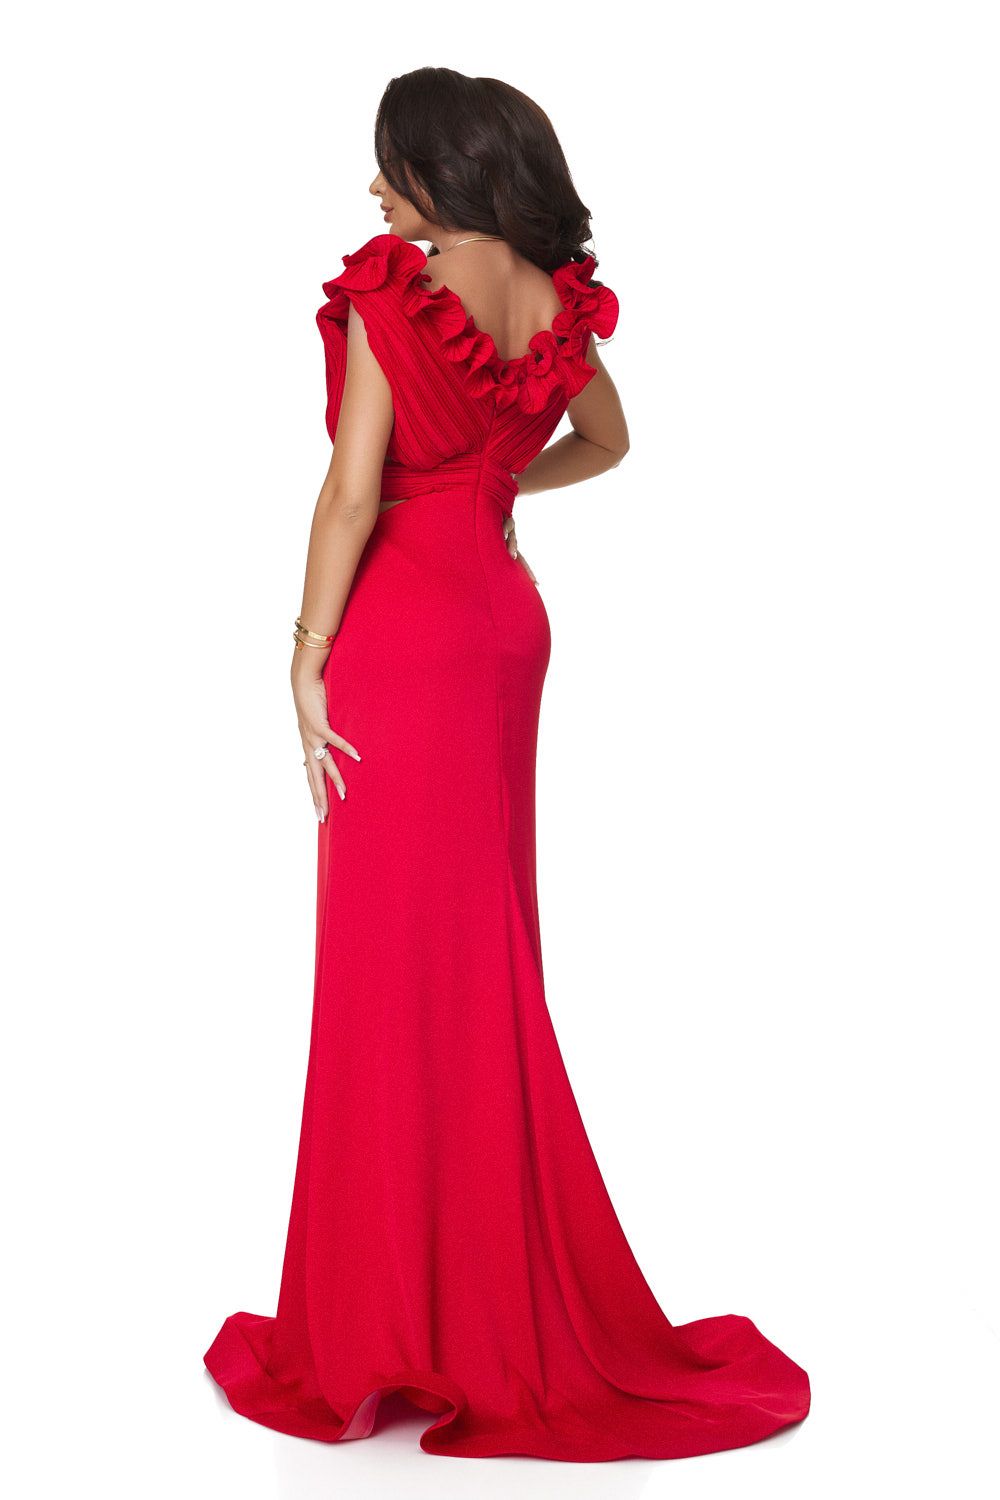 Long red dress for women by Zapissa Bogas